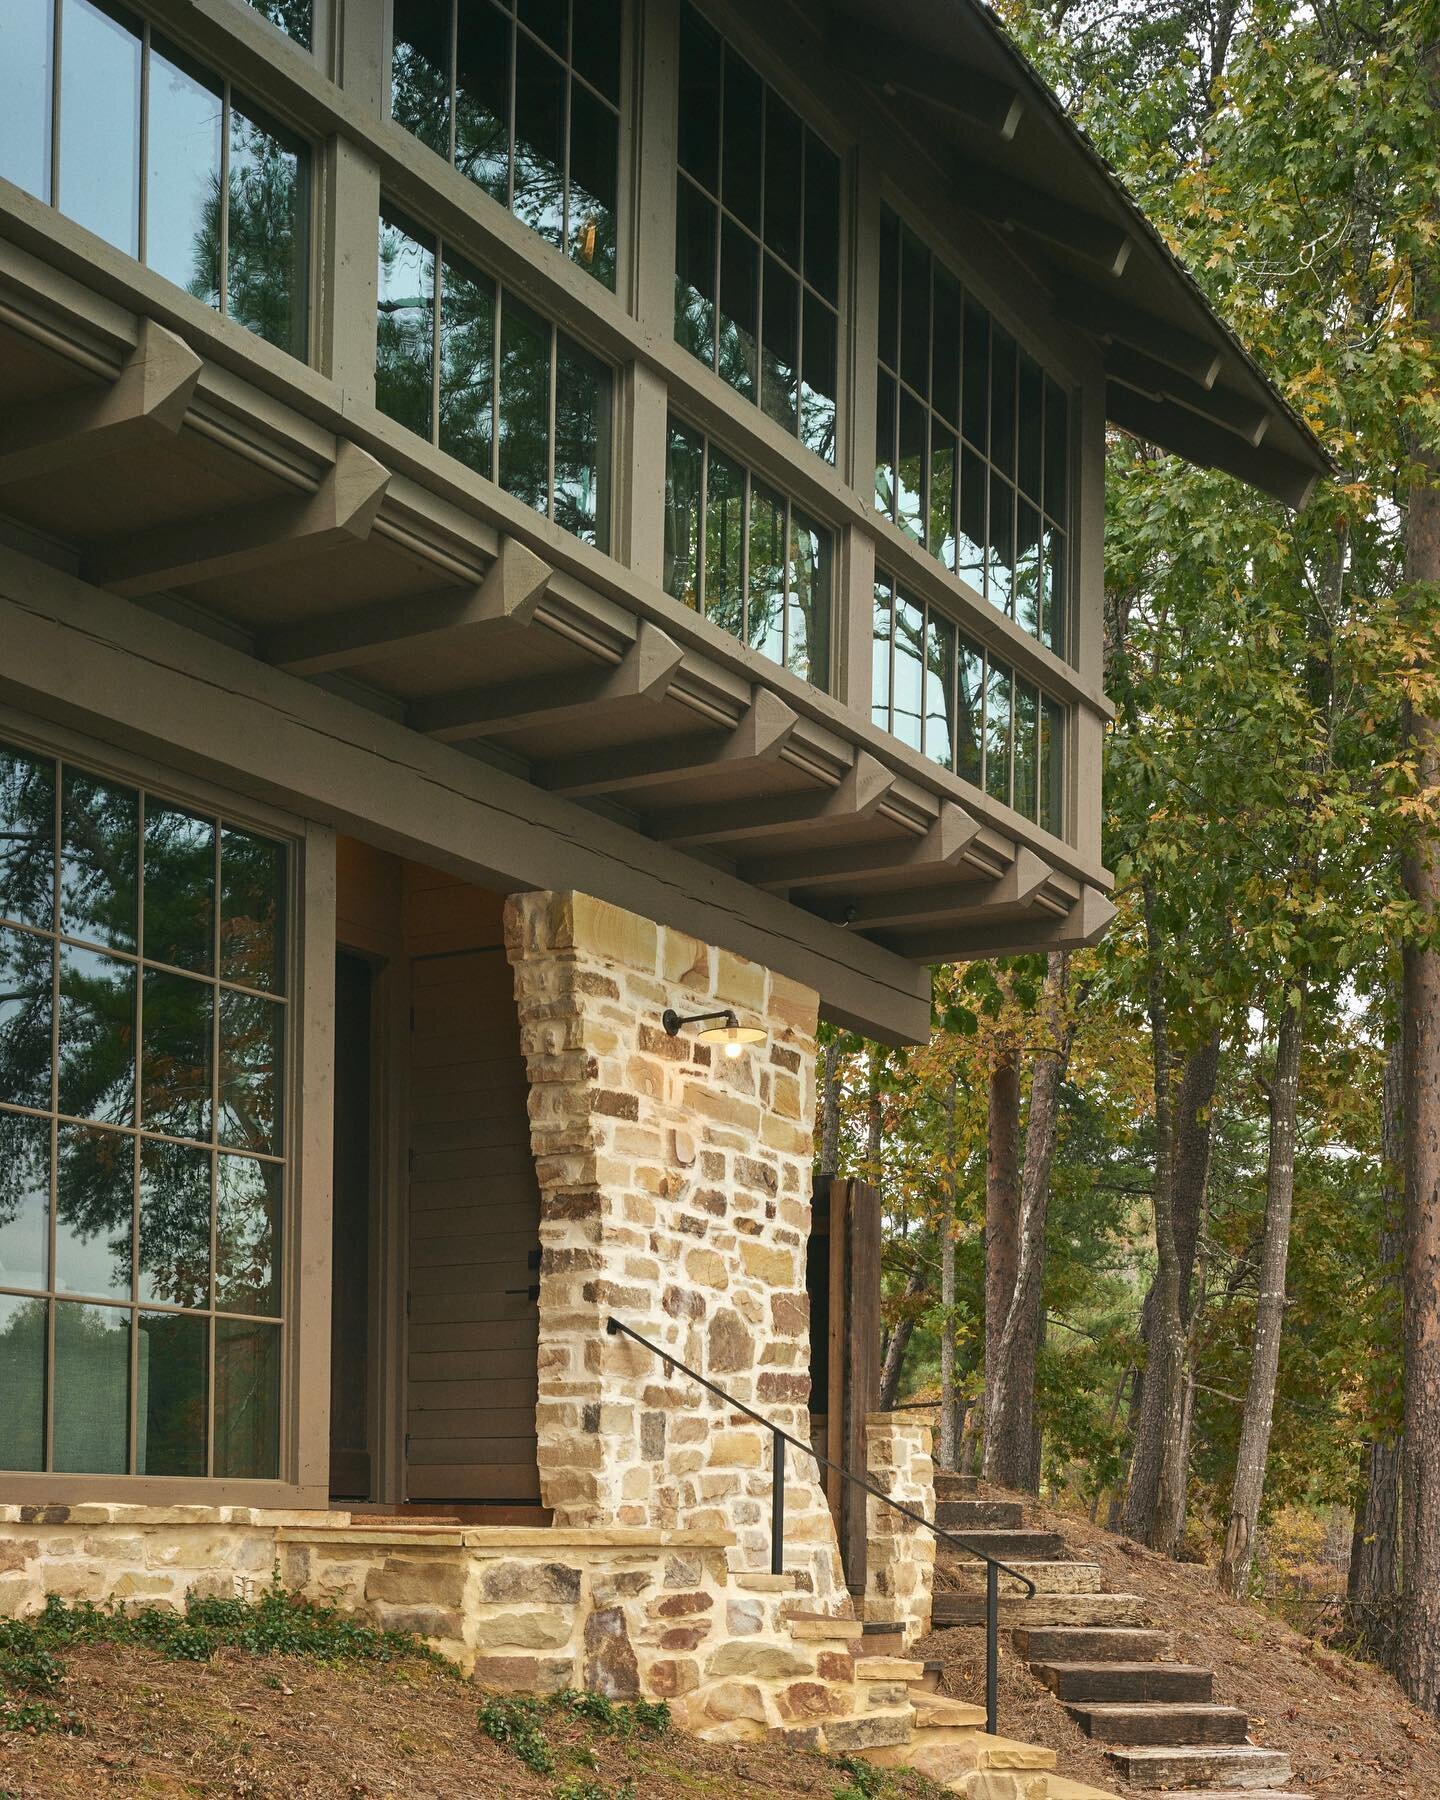 A cozy and humble home made of honest materials and honoring nature with every window view.  The home overlooks beautiful Smith Lake.  Designed by architect @lnequette @nequettearchitecture 
.
.
.
#architecture #lakehome #interiordesign #smithlake #h